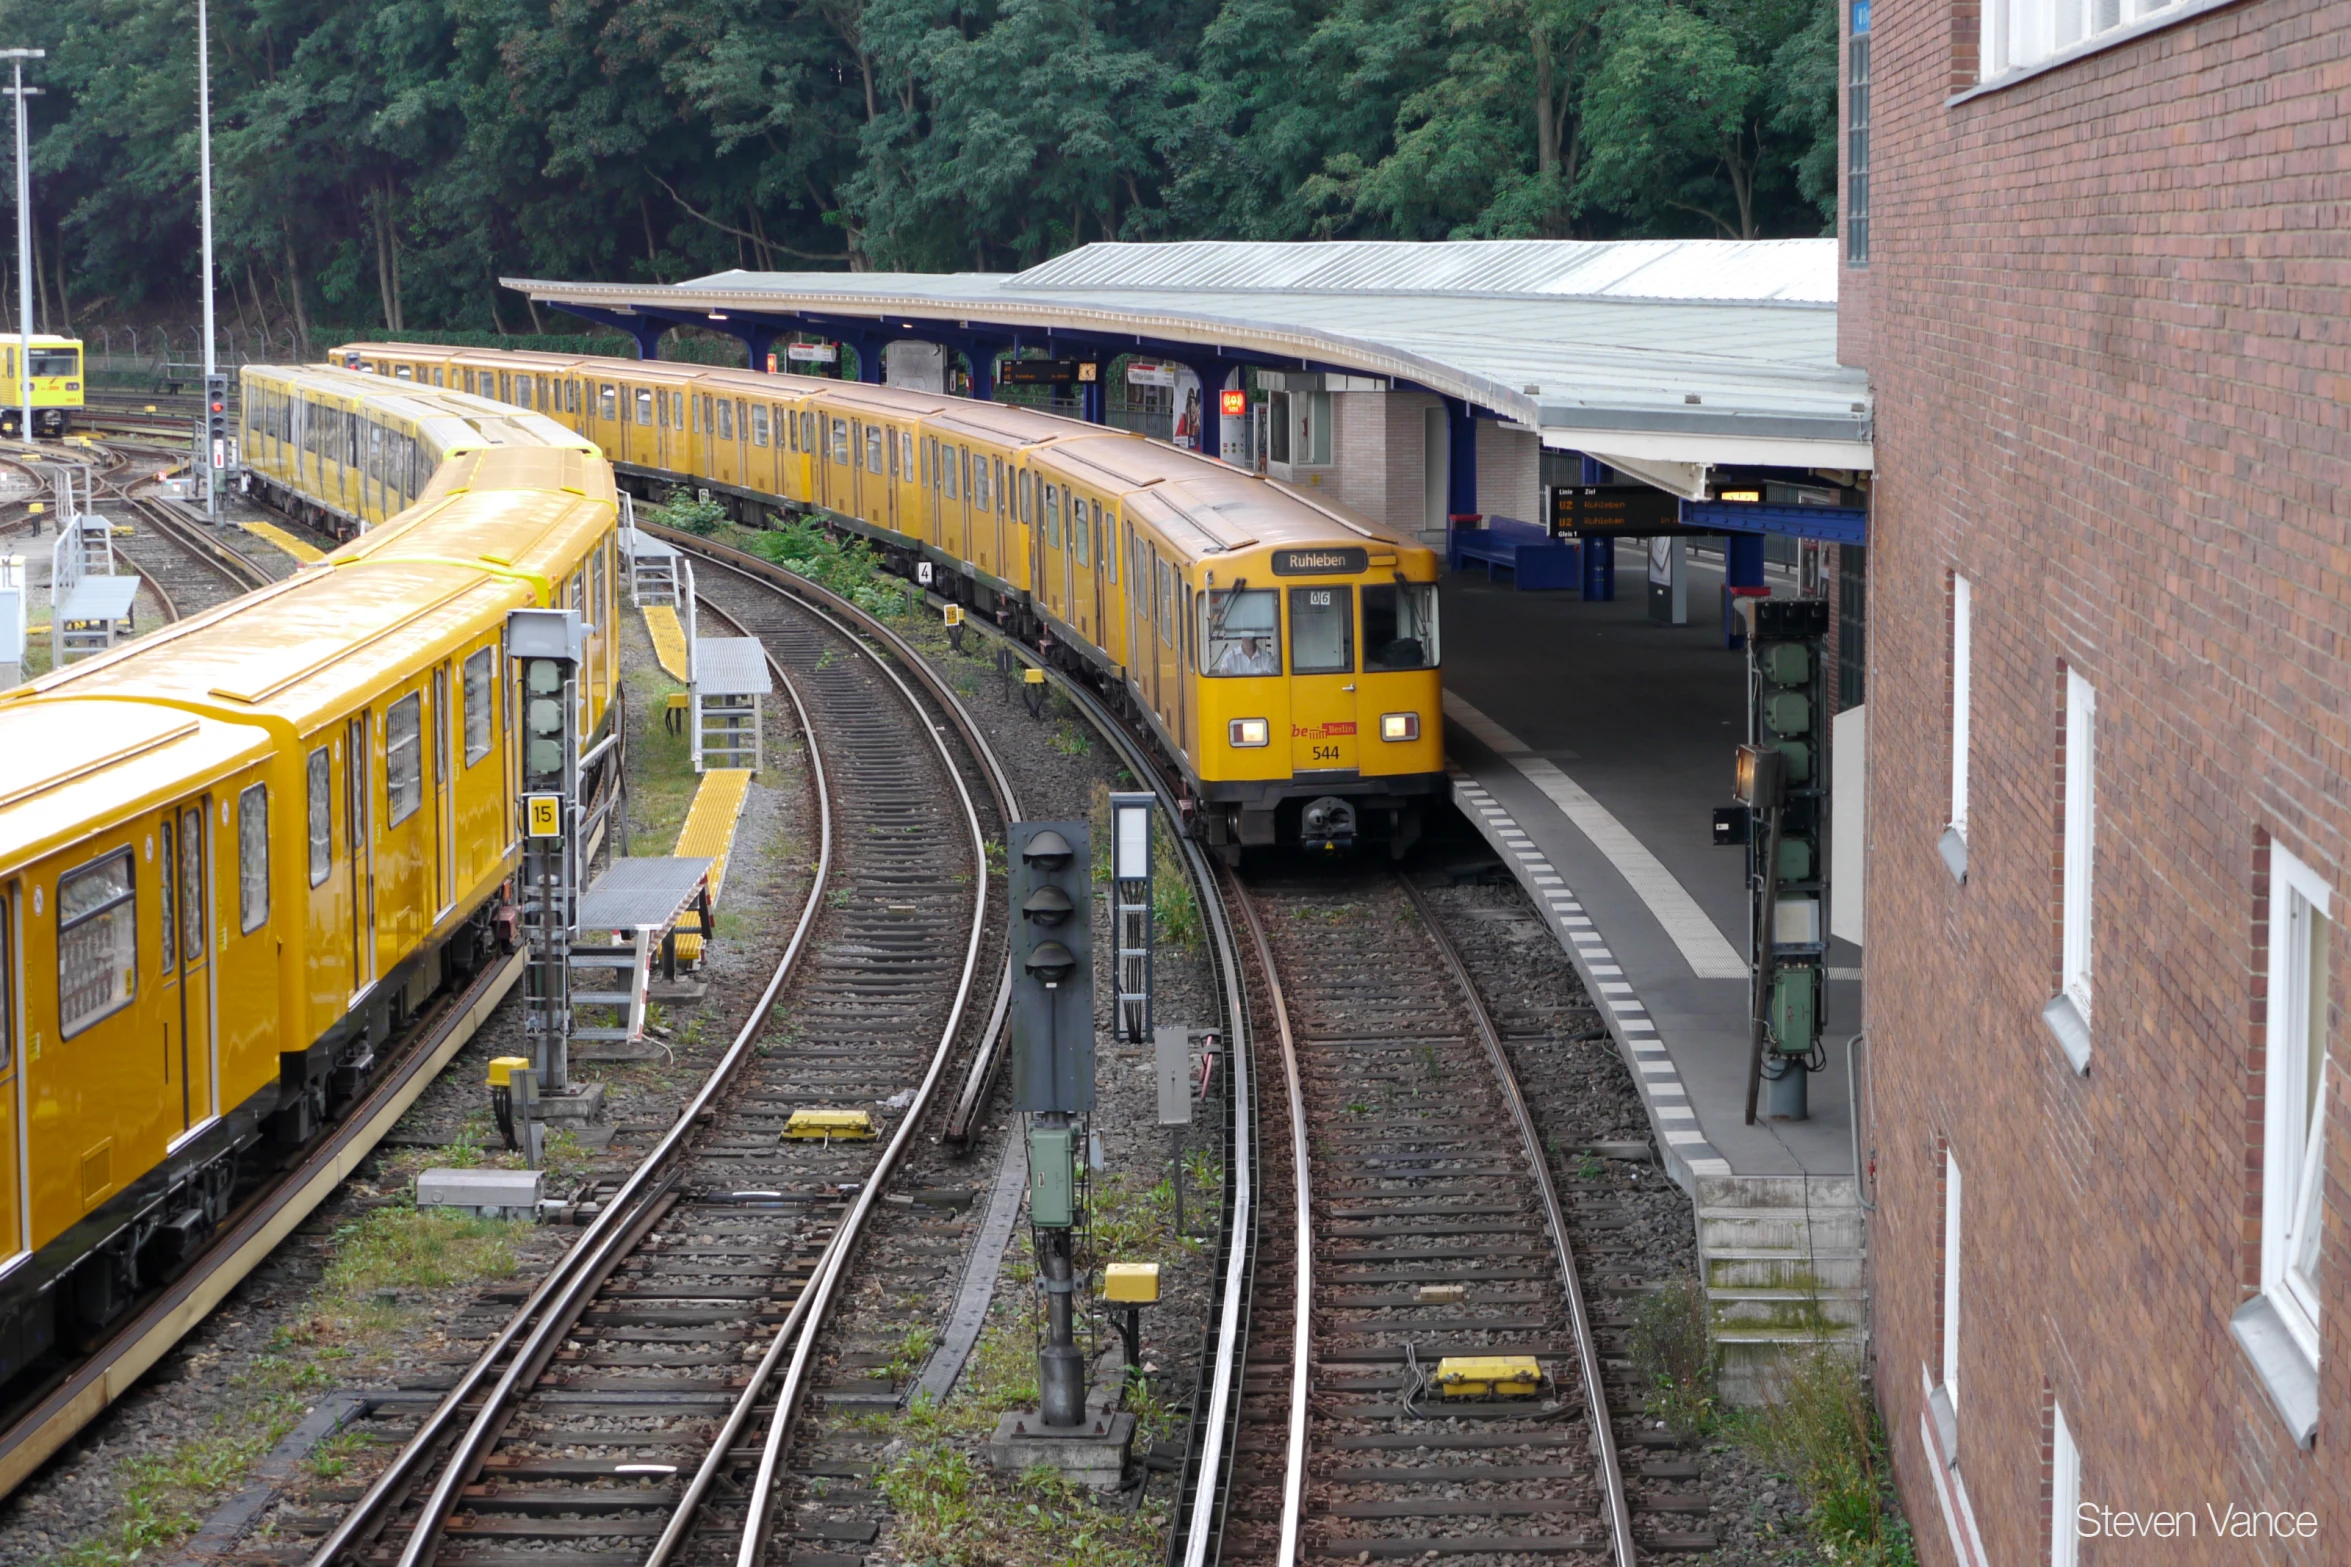 yellow trains lined up next to each other at a station